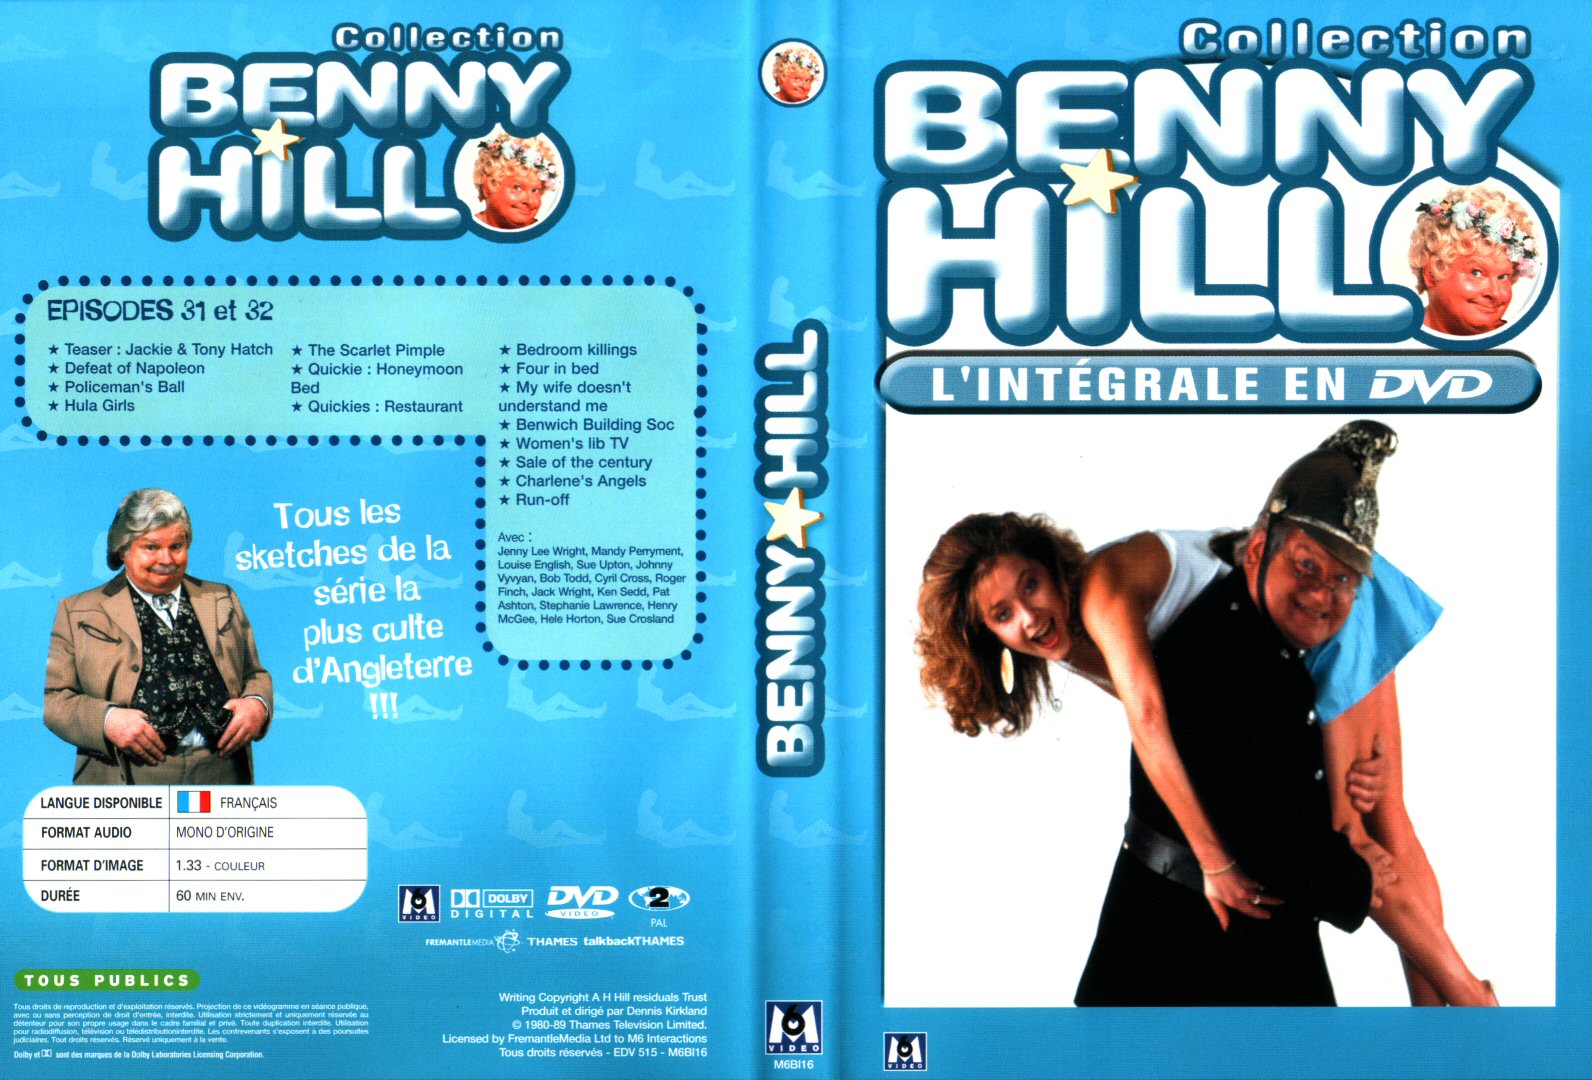 Jaquette DVD Benny Hill collection Episodes 31-32